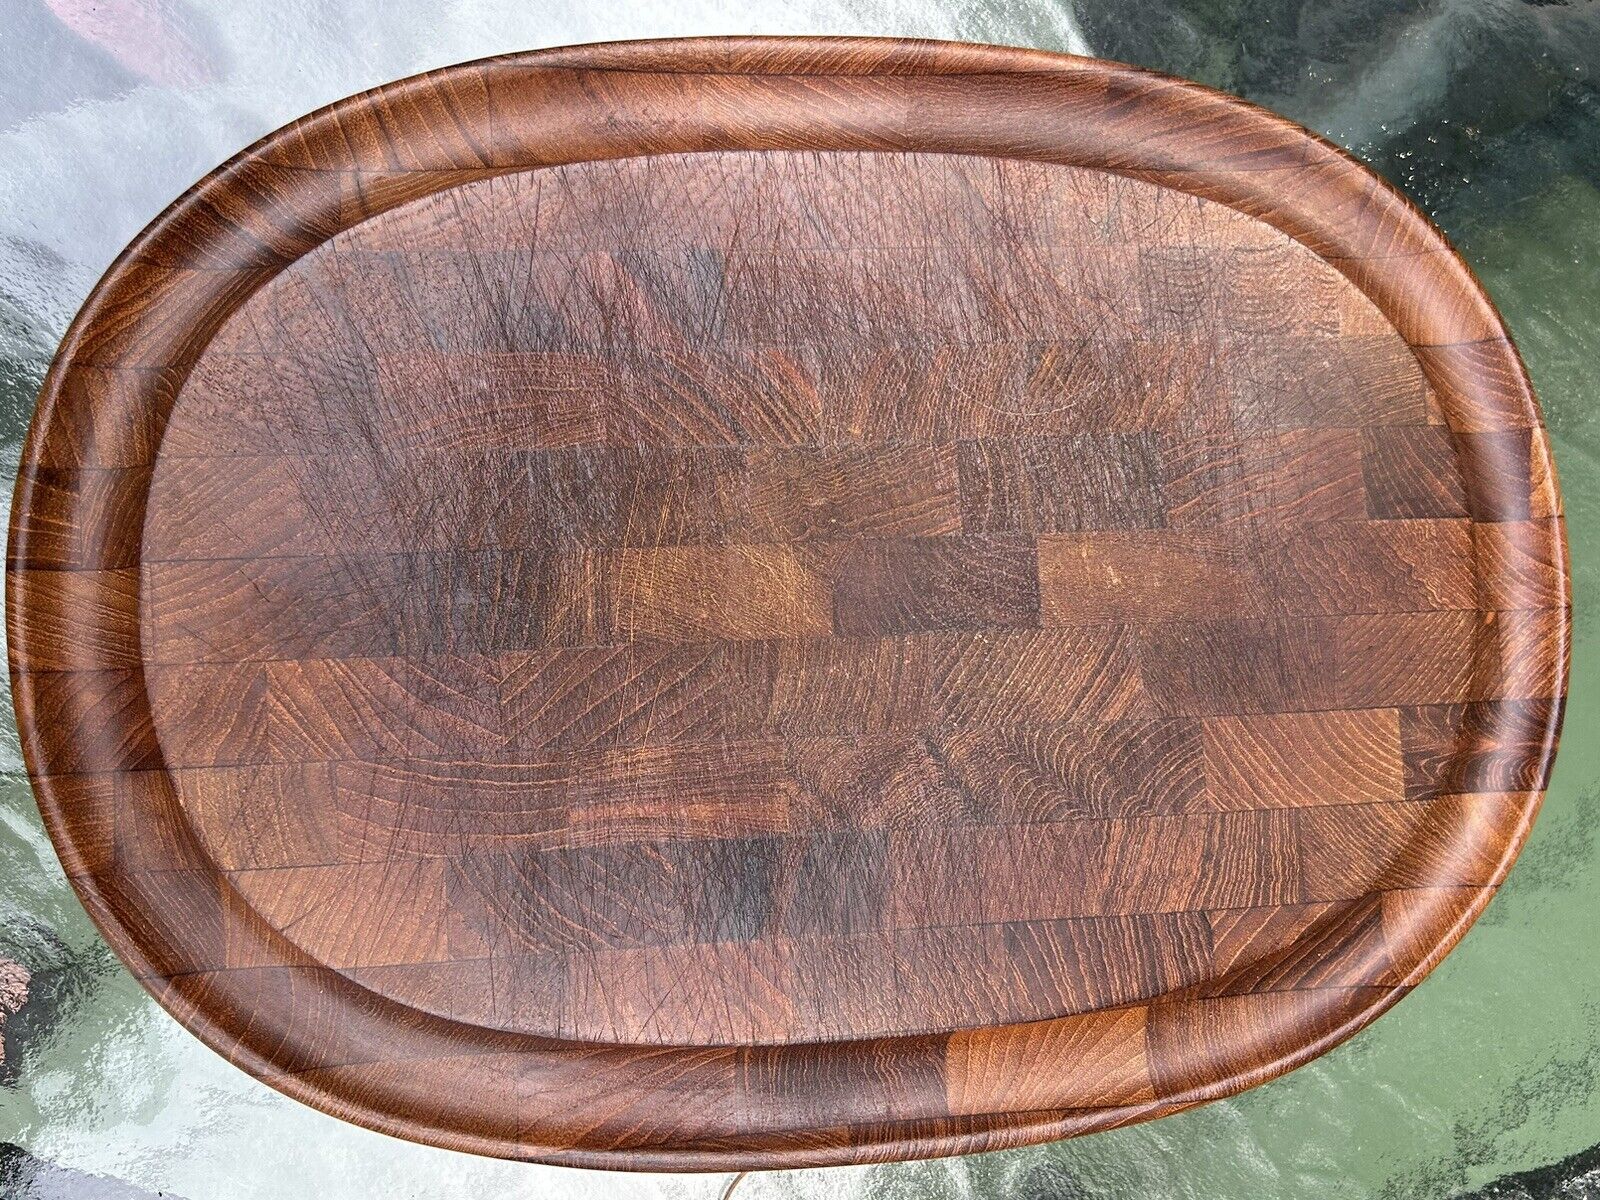 Vintage Digsmed Denmark Footed Teak Meat Serving Cutting Board Tray, 10x14.